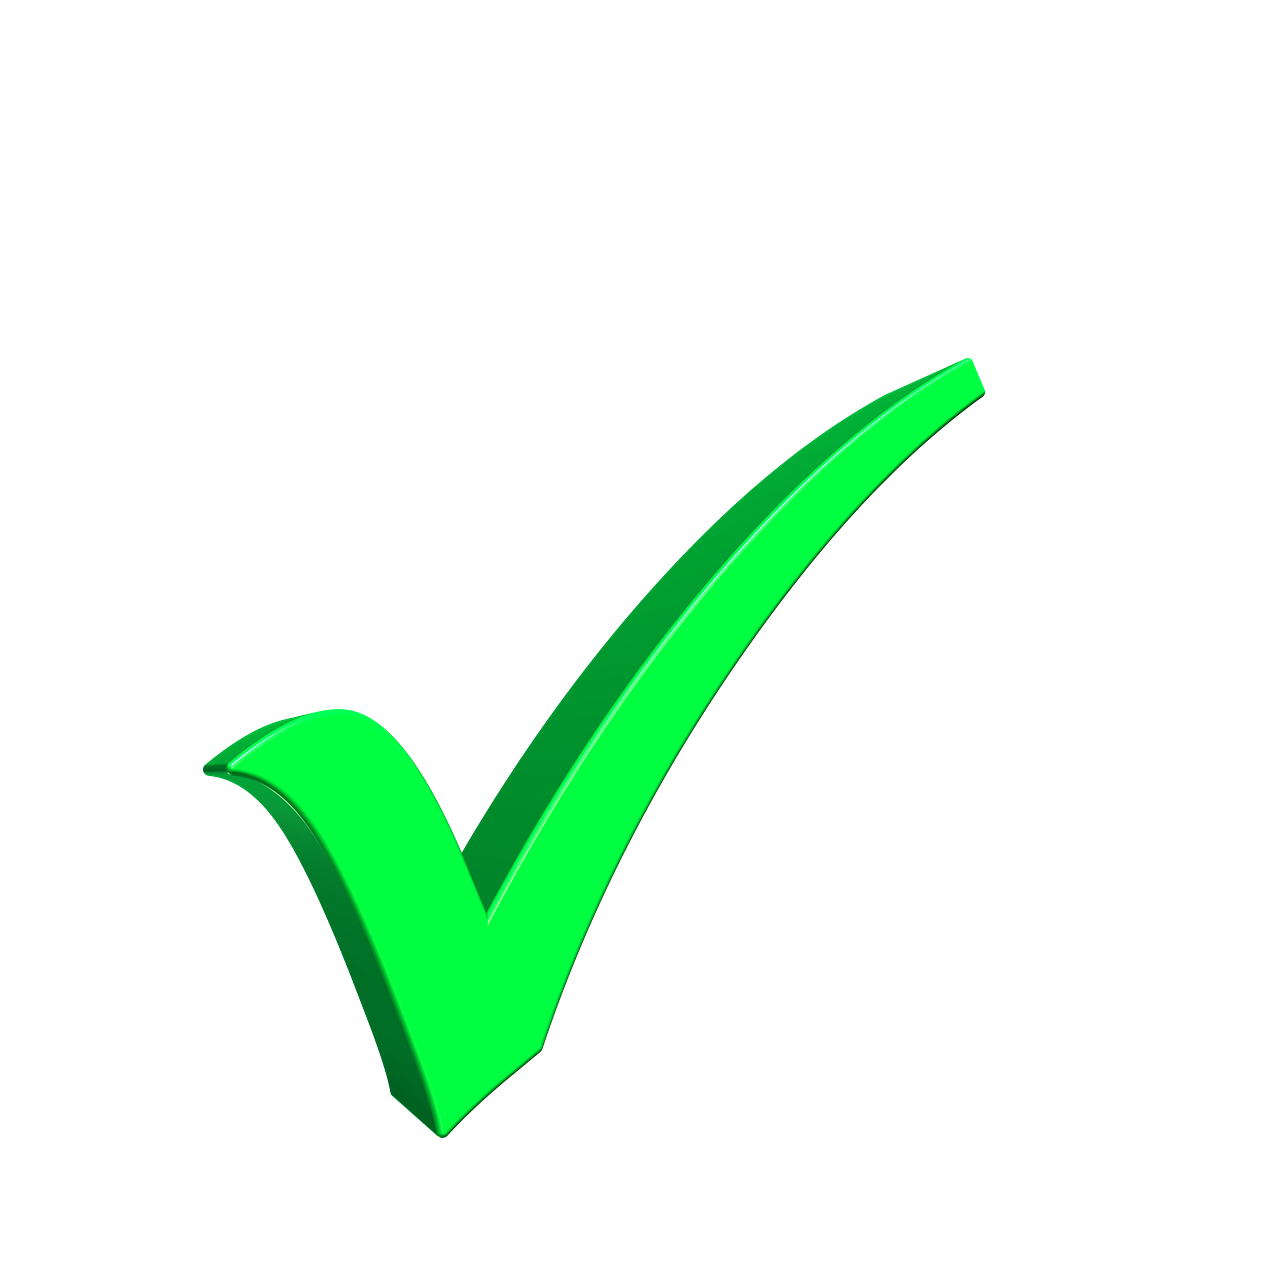 a green check mark on a black background, a raytraced image, high quality 4k, digitally painted, listing image, victory